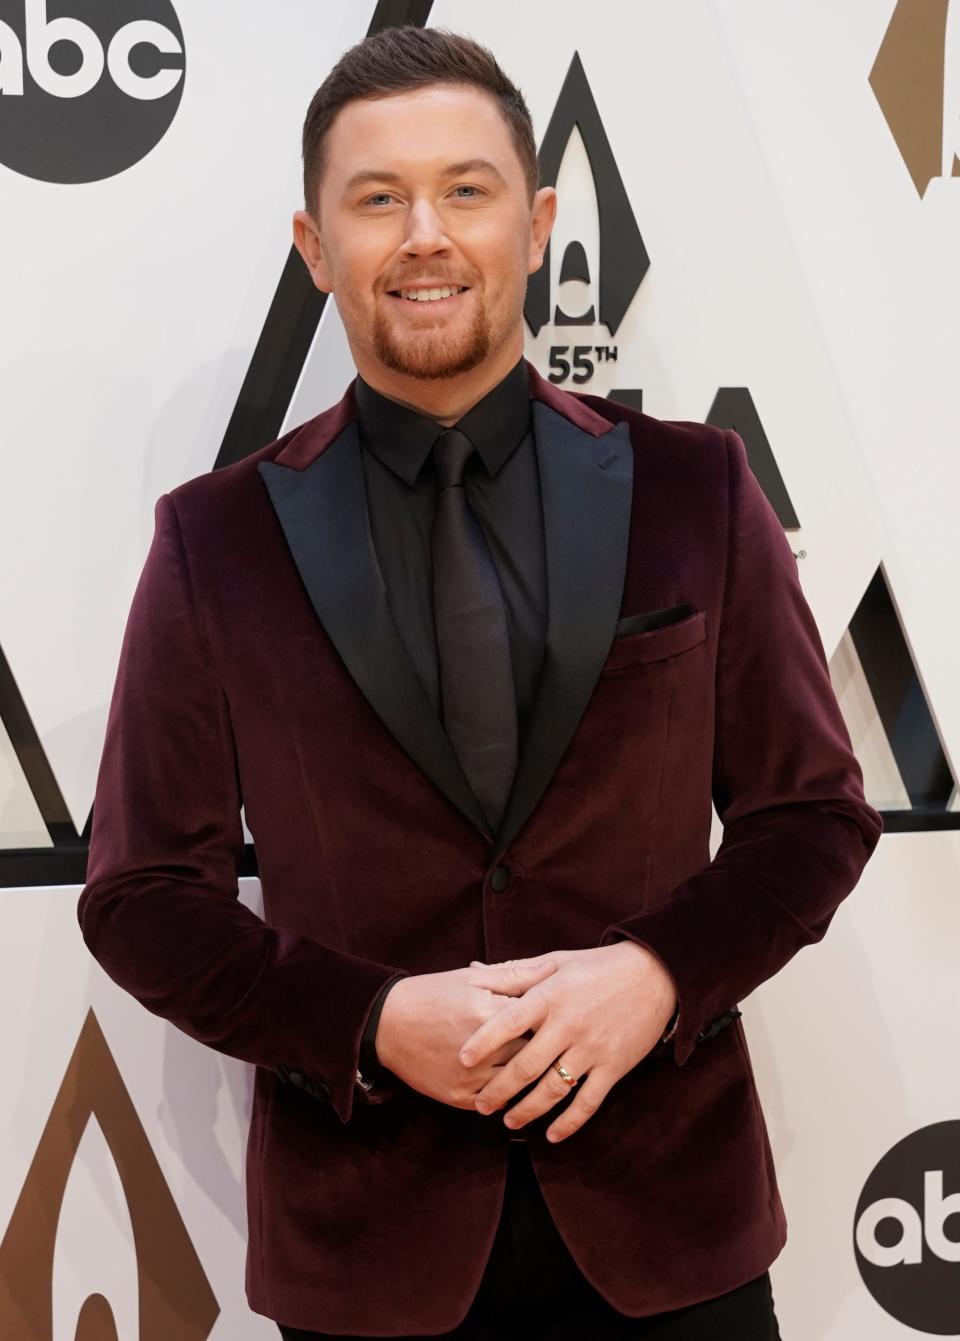 Scotty McCreery, who won “American Idol” in 2011, recorded the song “Five More Minutes,” which inspired a new Hallmark Movies & Mysteries Christmas movie.